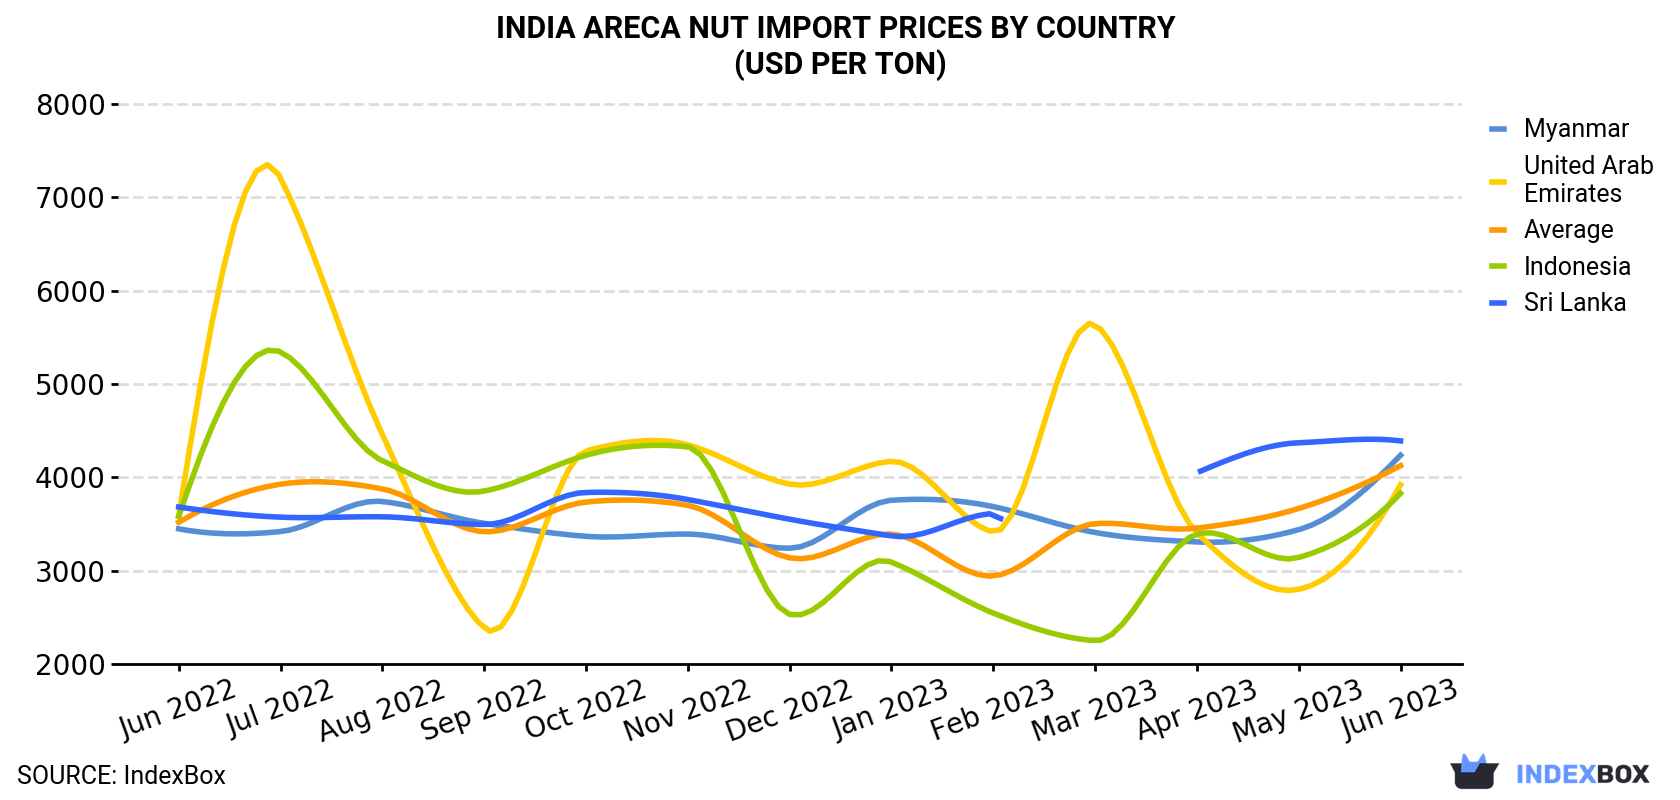 India Areca Nut Import Prices By Country (USD Per Ton)